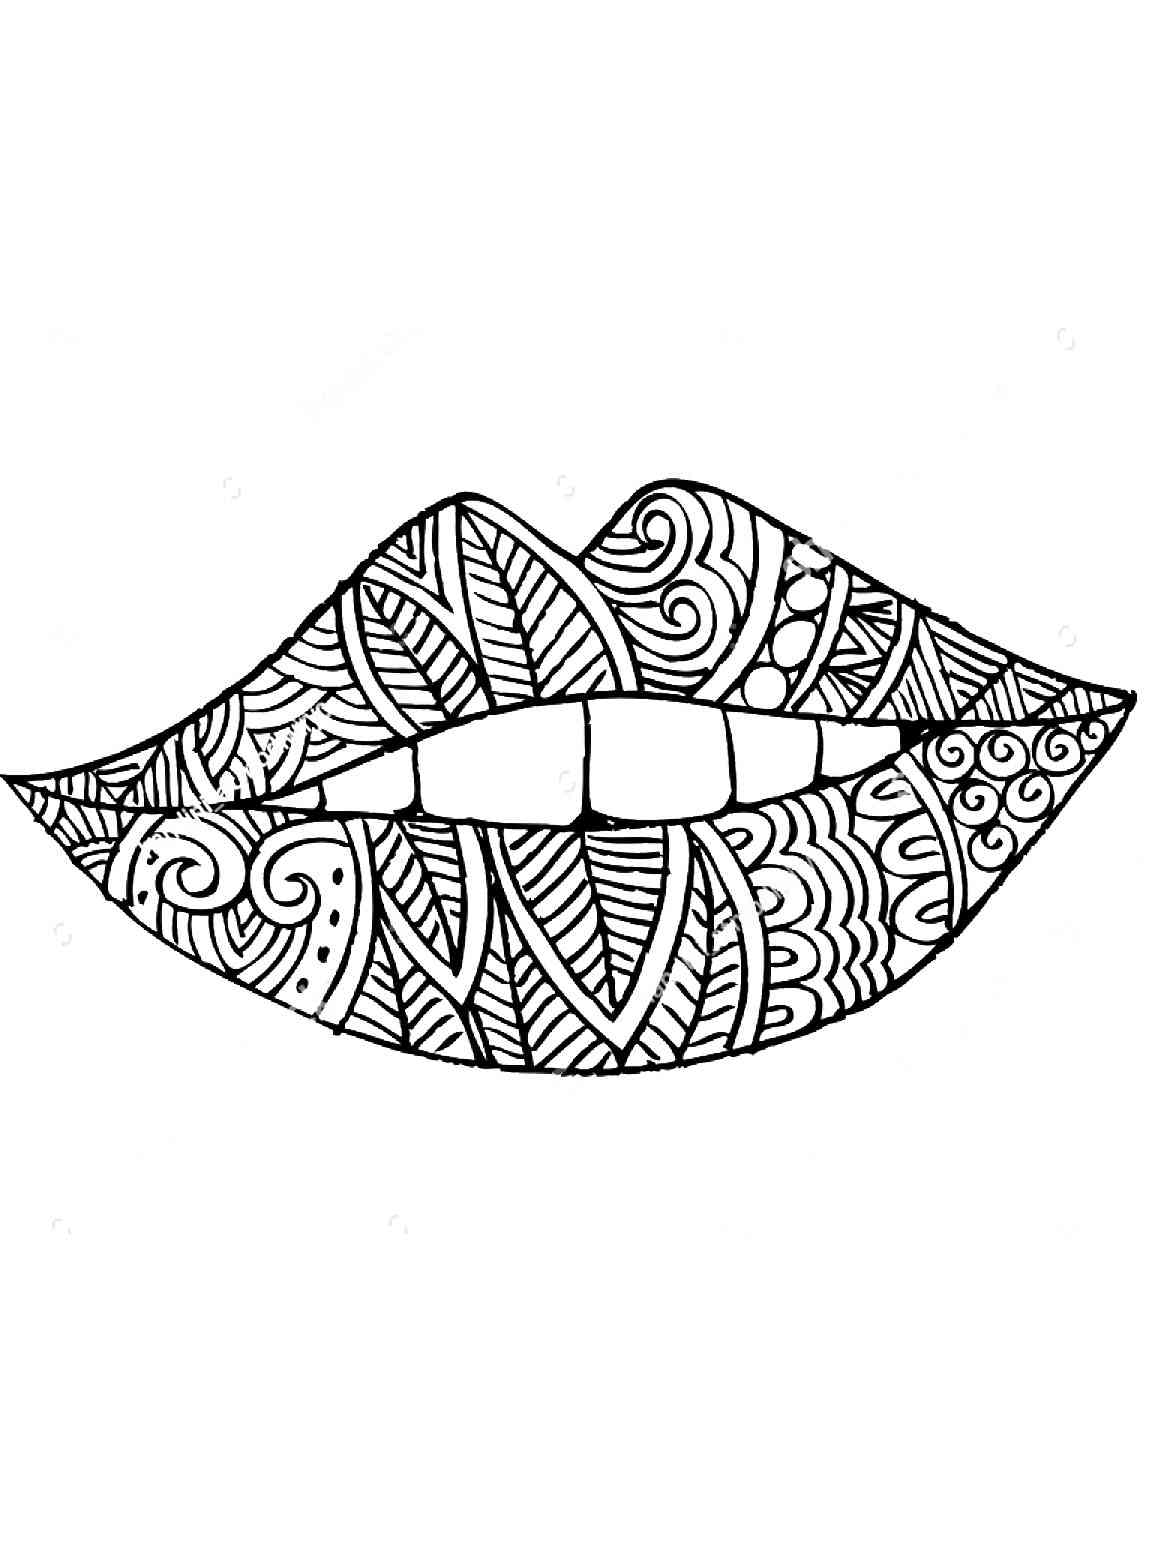 Lips coloring pages for adults